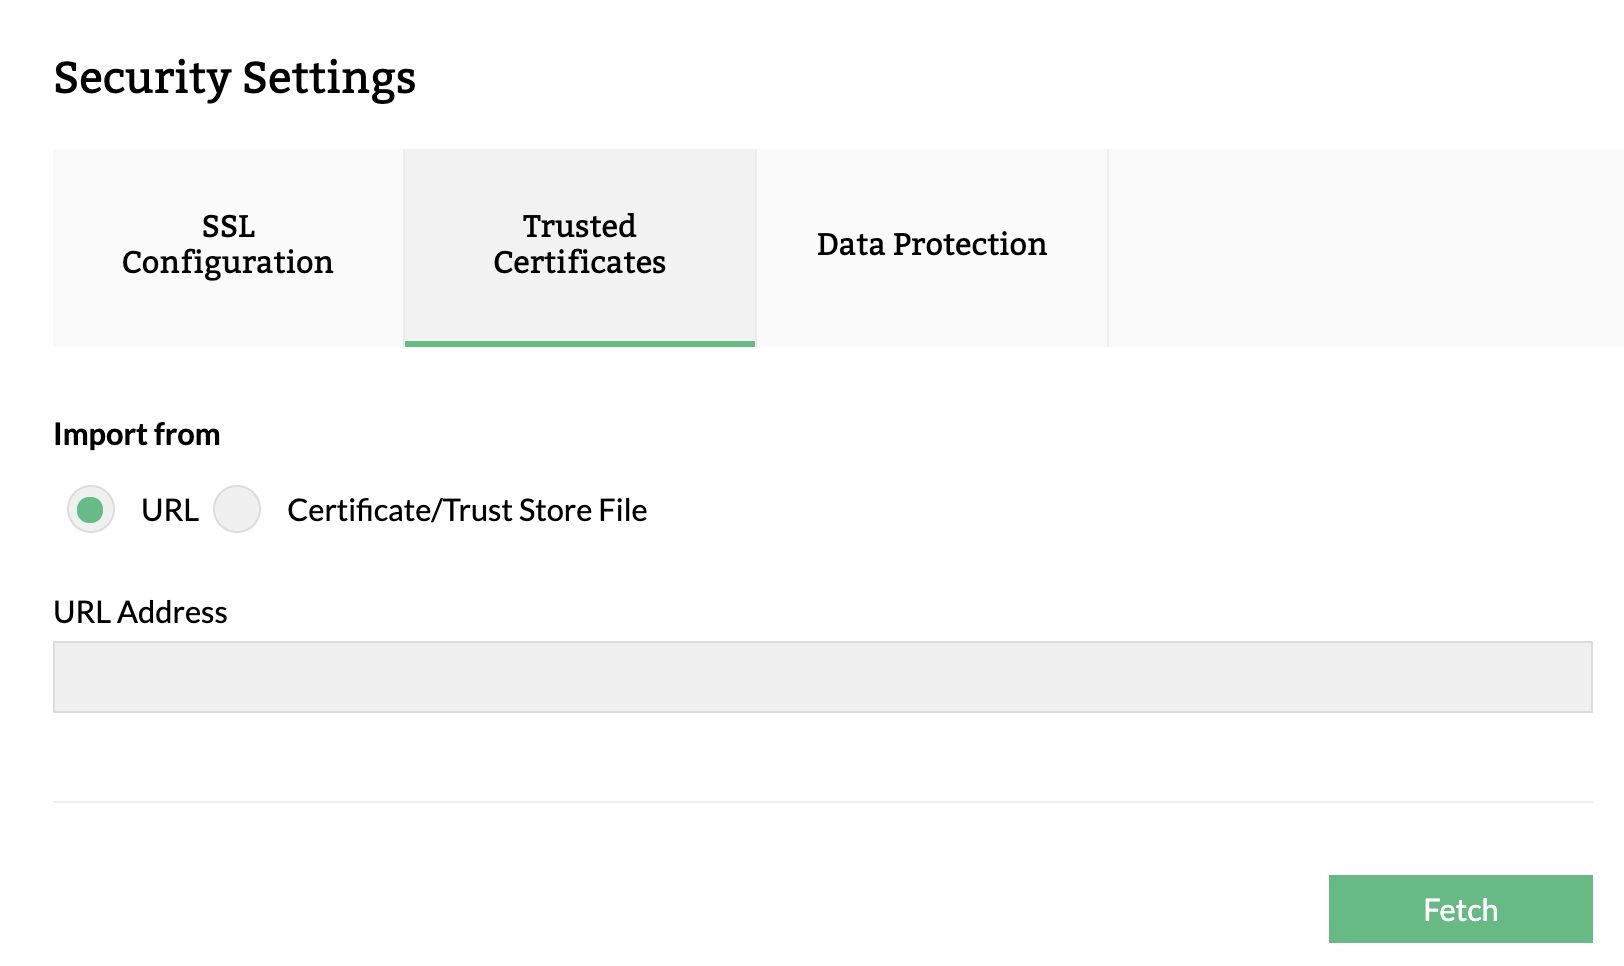 Trusted Certificates